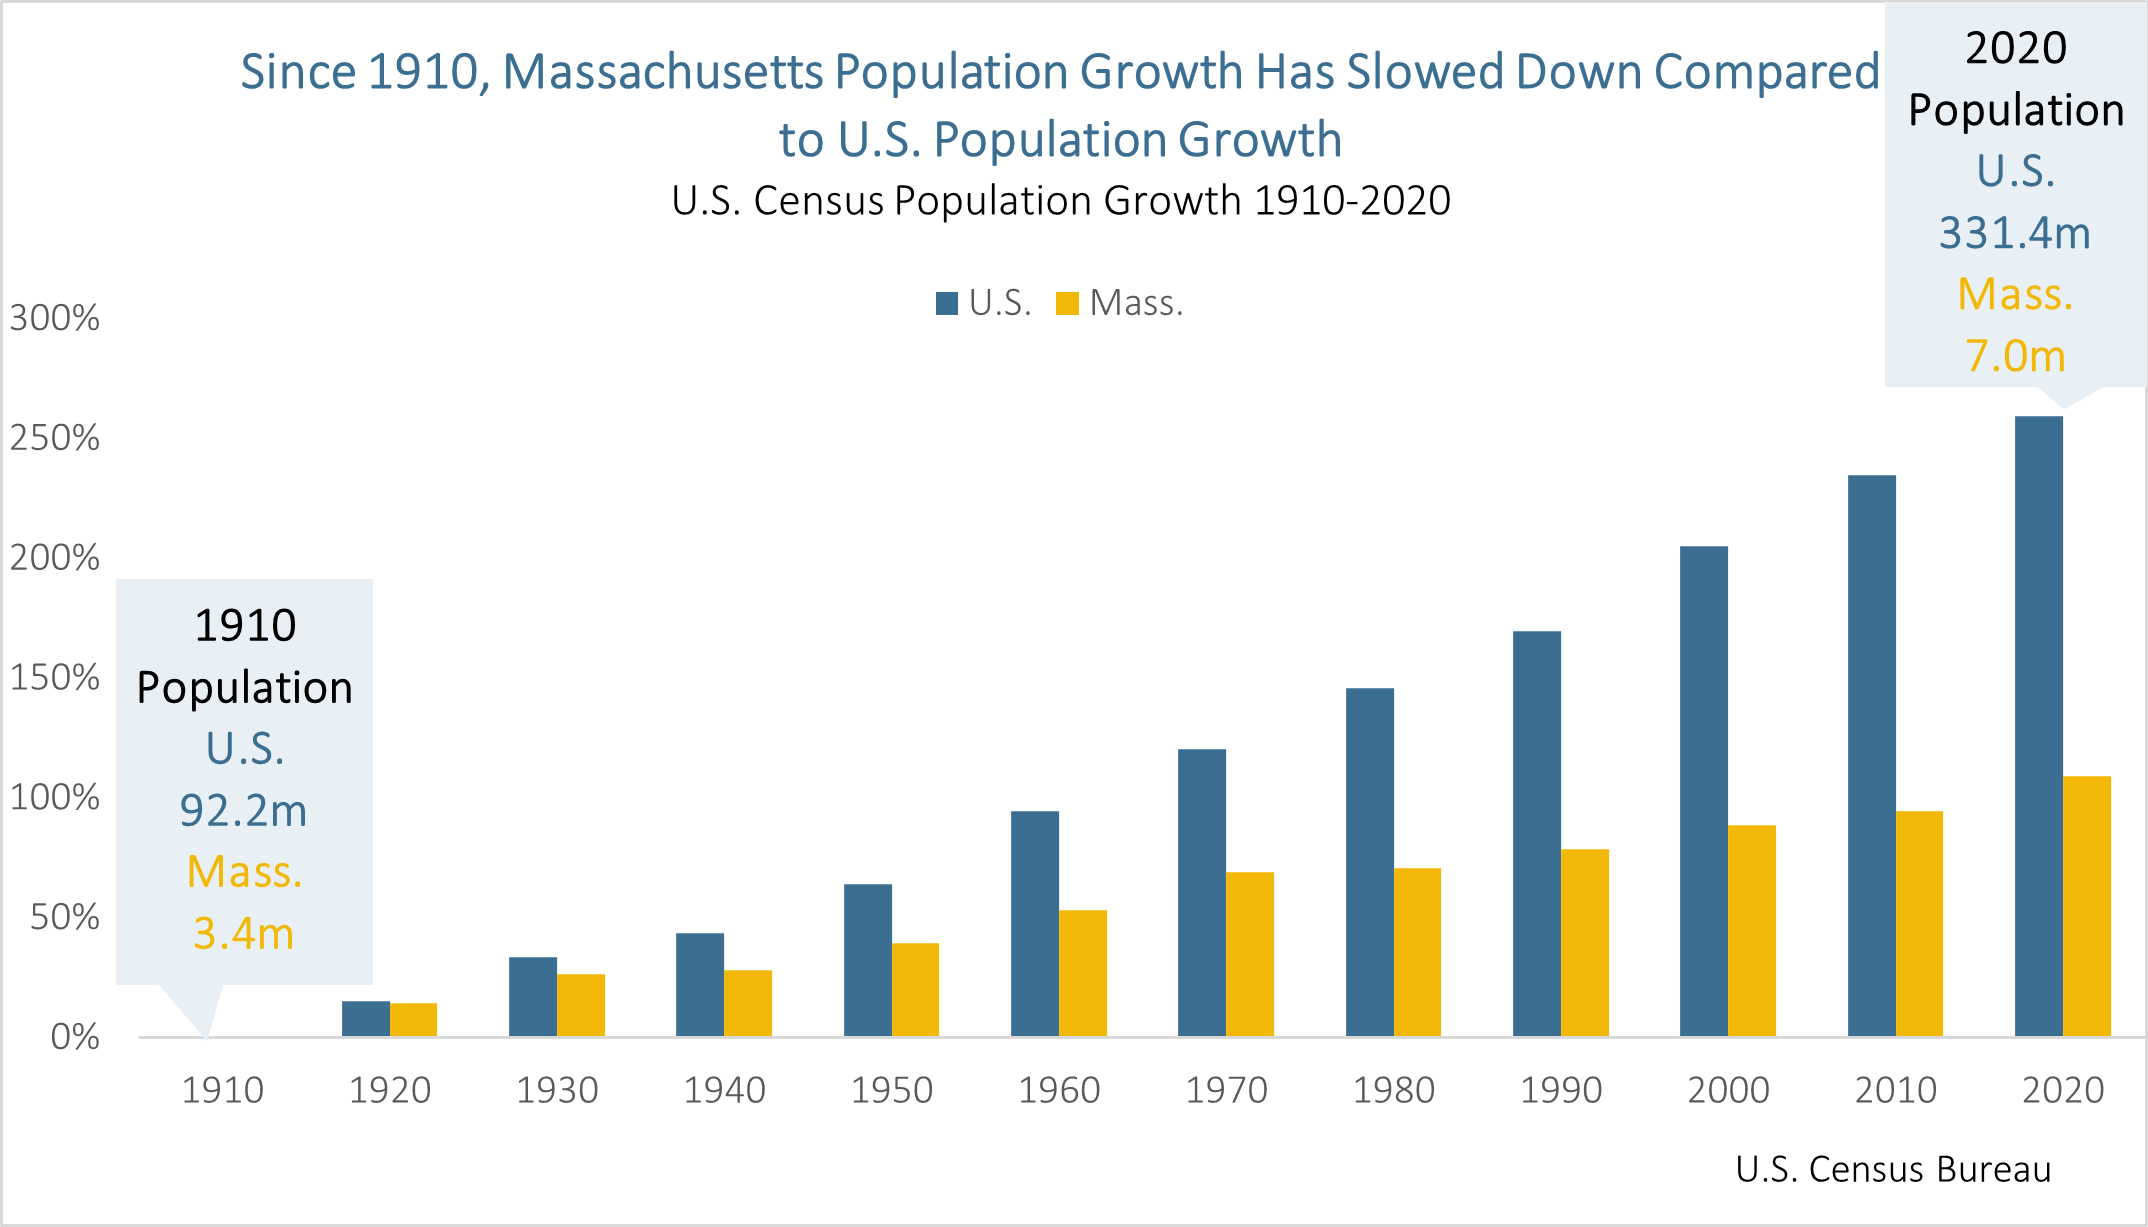 Bar charts: Since 1910, MA population growth has slowed down compared to U.S. population growth